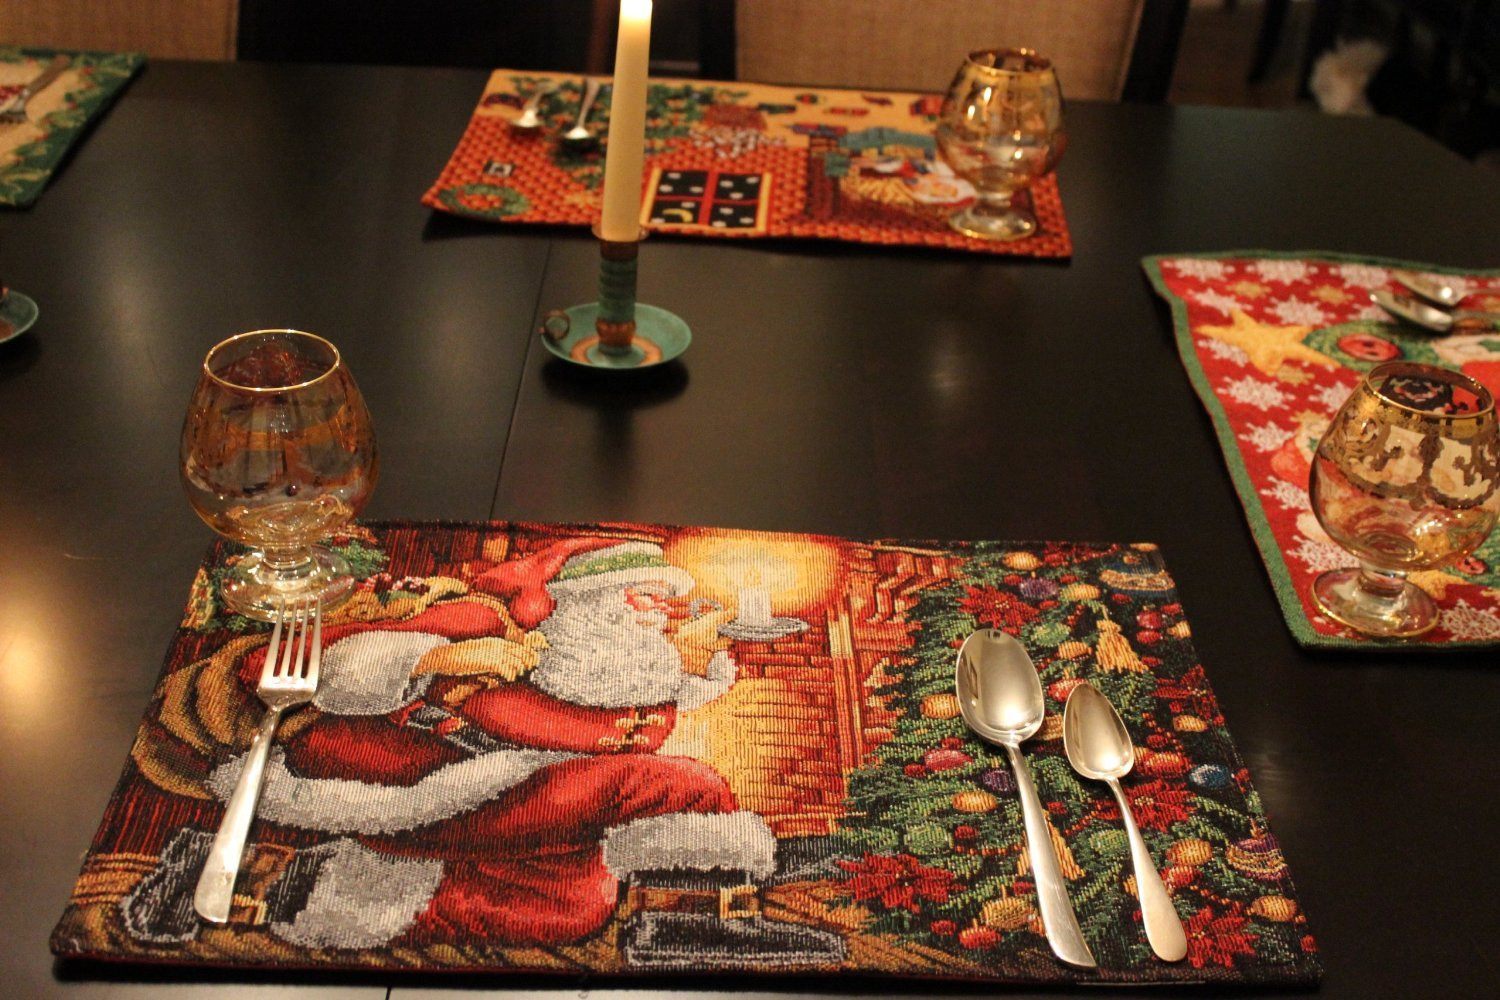 Tache Festive Santa Down the Chimney Woven Tapestry Placemat Set of 4 (11533PM) - Tache Home Fashion